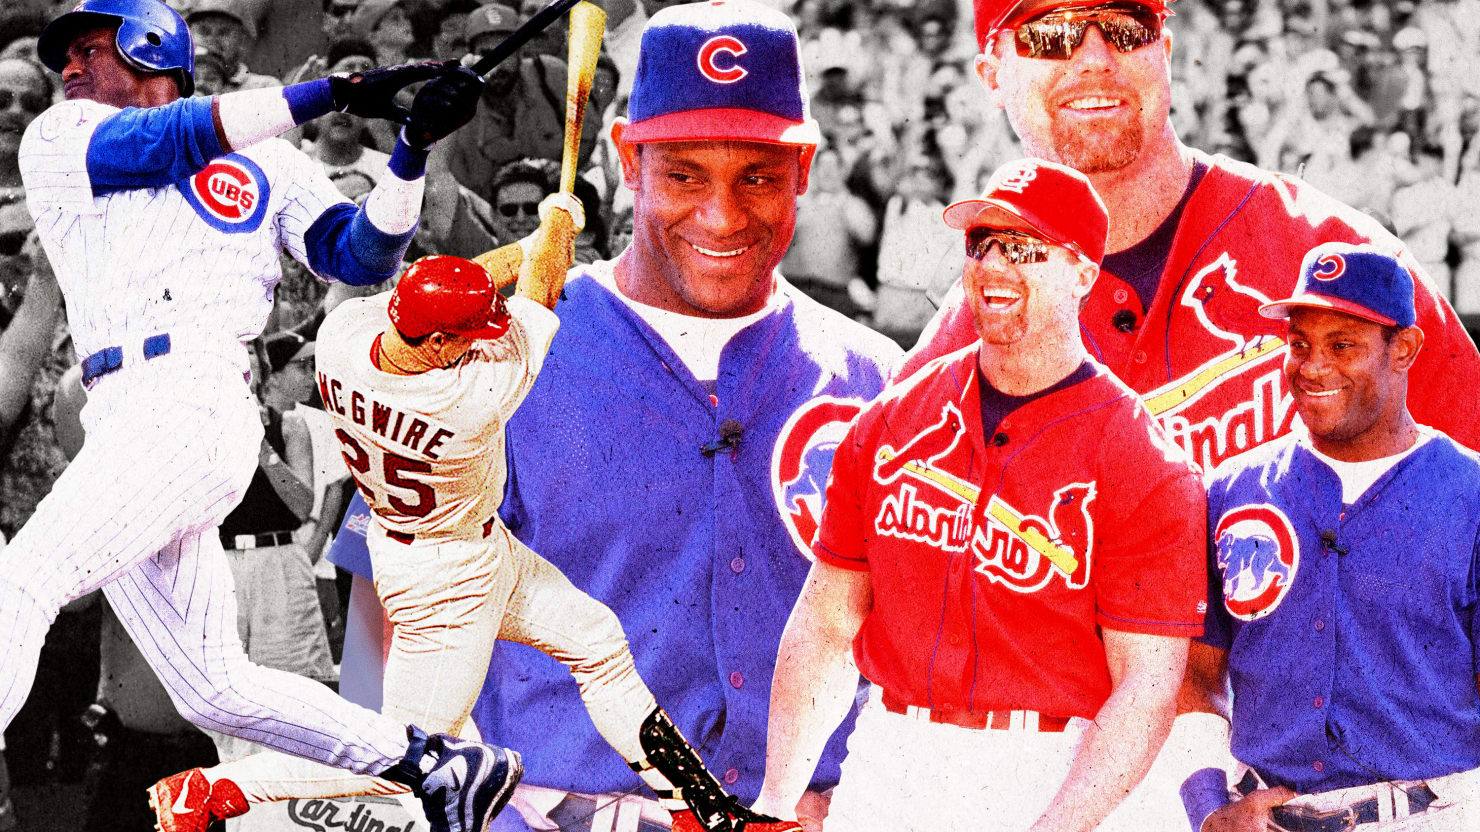 Mark McGwire on baseball's steroid era — 'I wish I was never a part of it